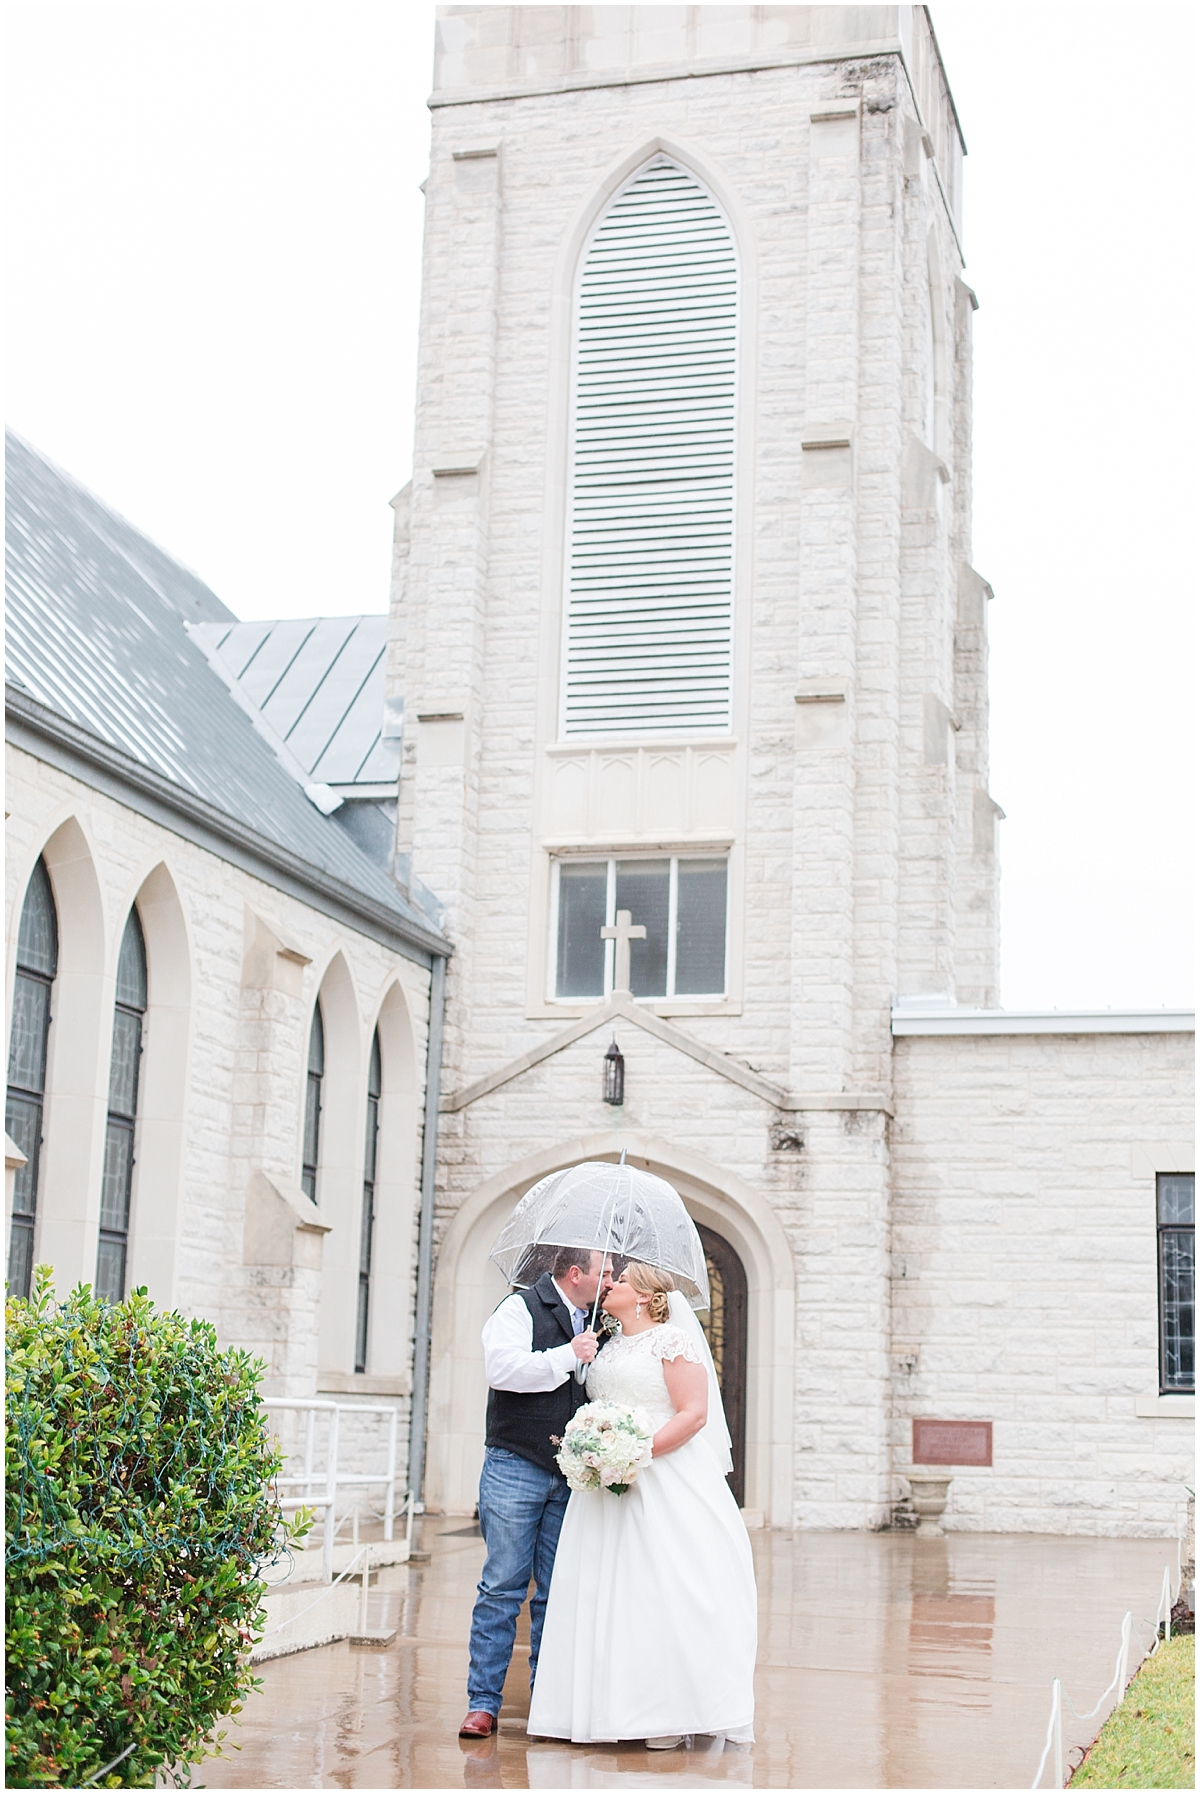 a-charcoal-grey-ivory-burgundy-winter-wedding-at-bethany-lutheran-church-in-fredericksburg-texas-by-allison-jeffers-wedding-photography-fredericksburg-wedding-photographer_0055